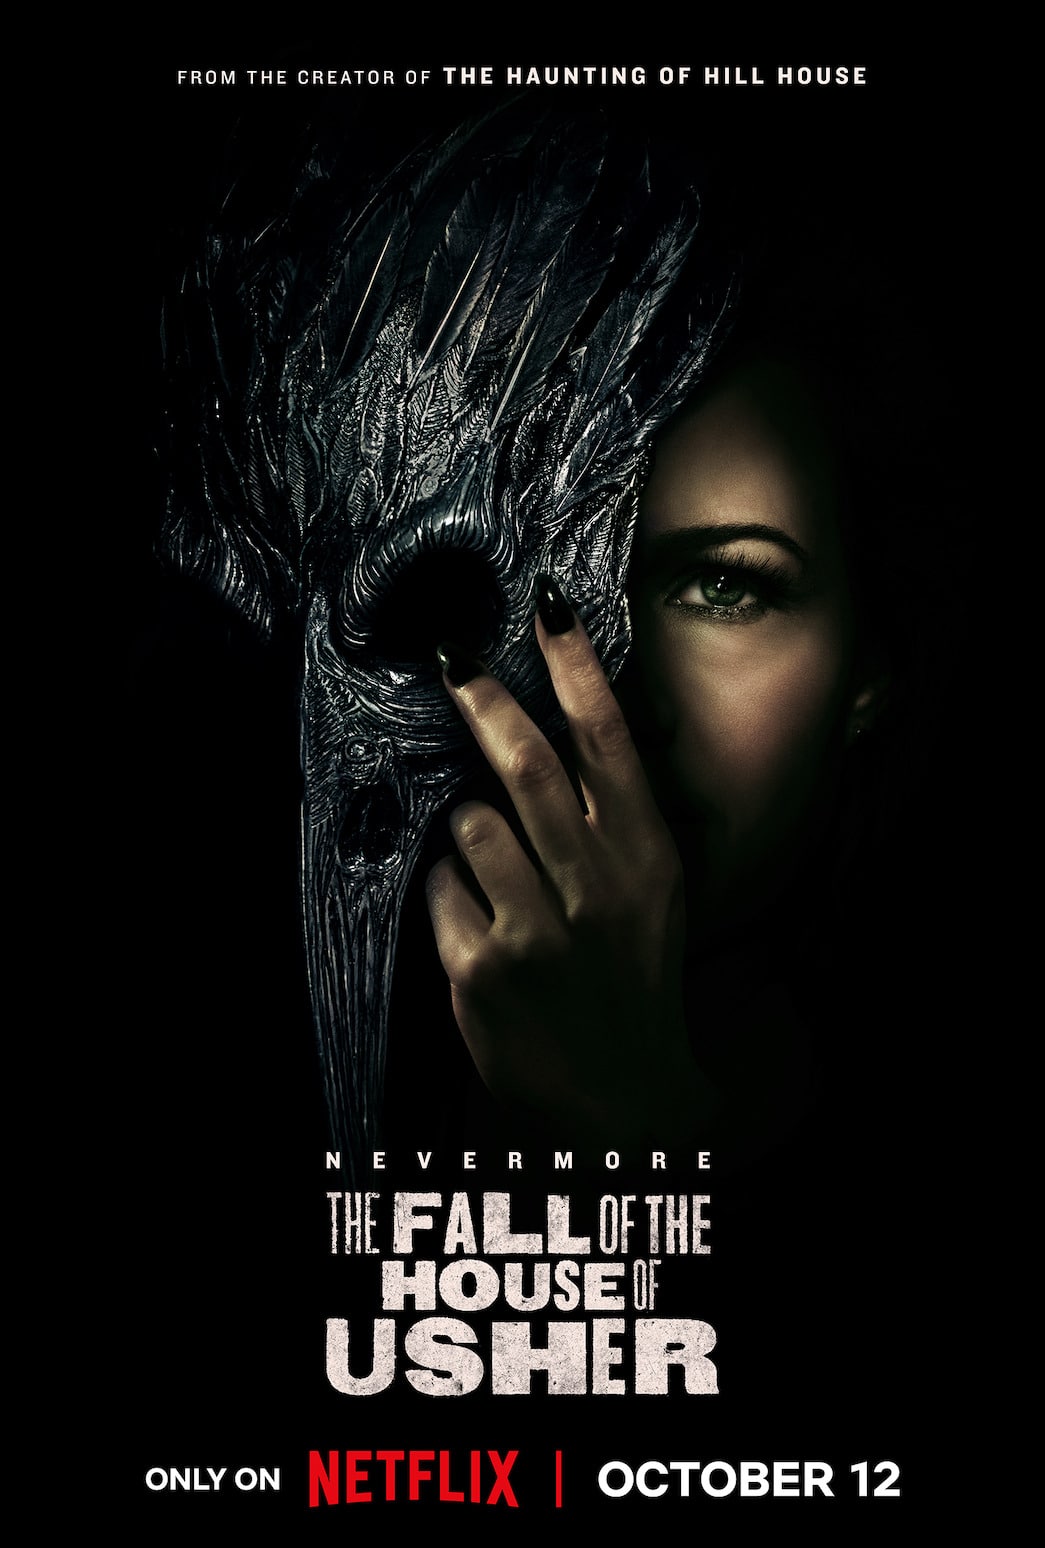 The Fall of the House of Usher - Teaser Poster 2